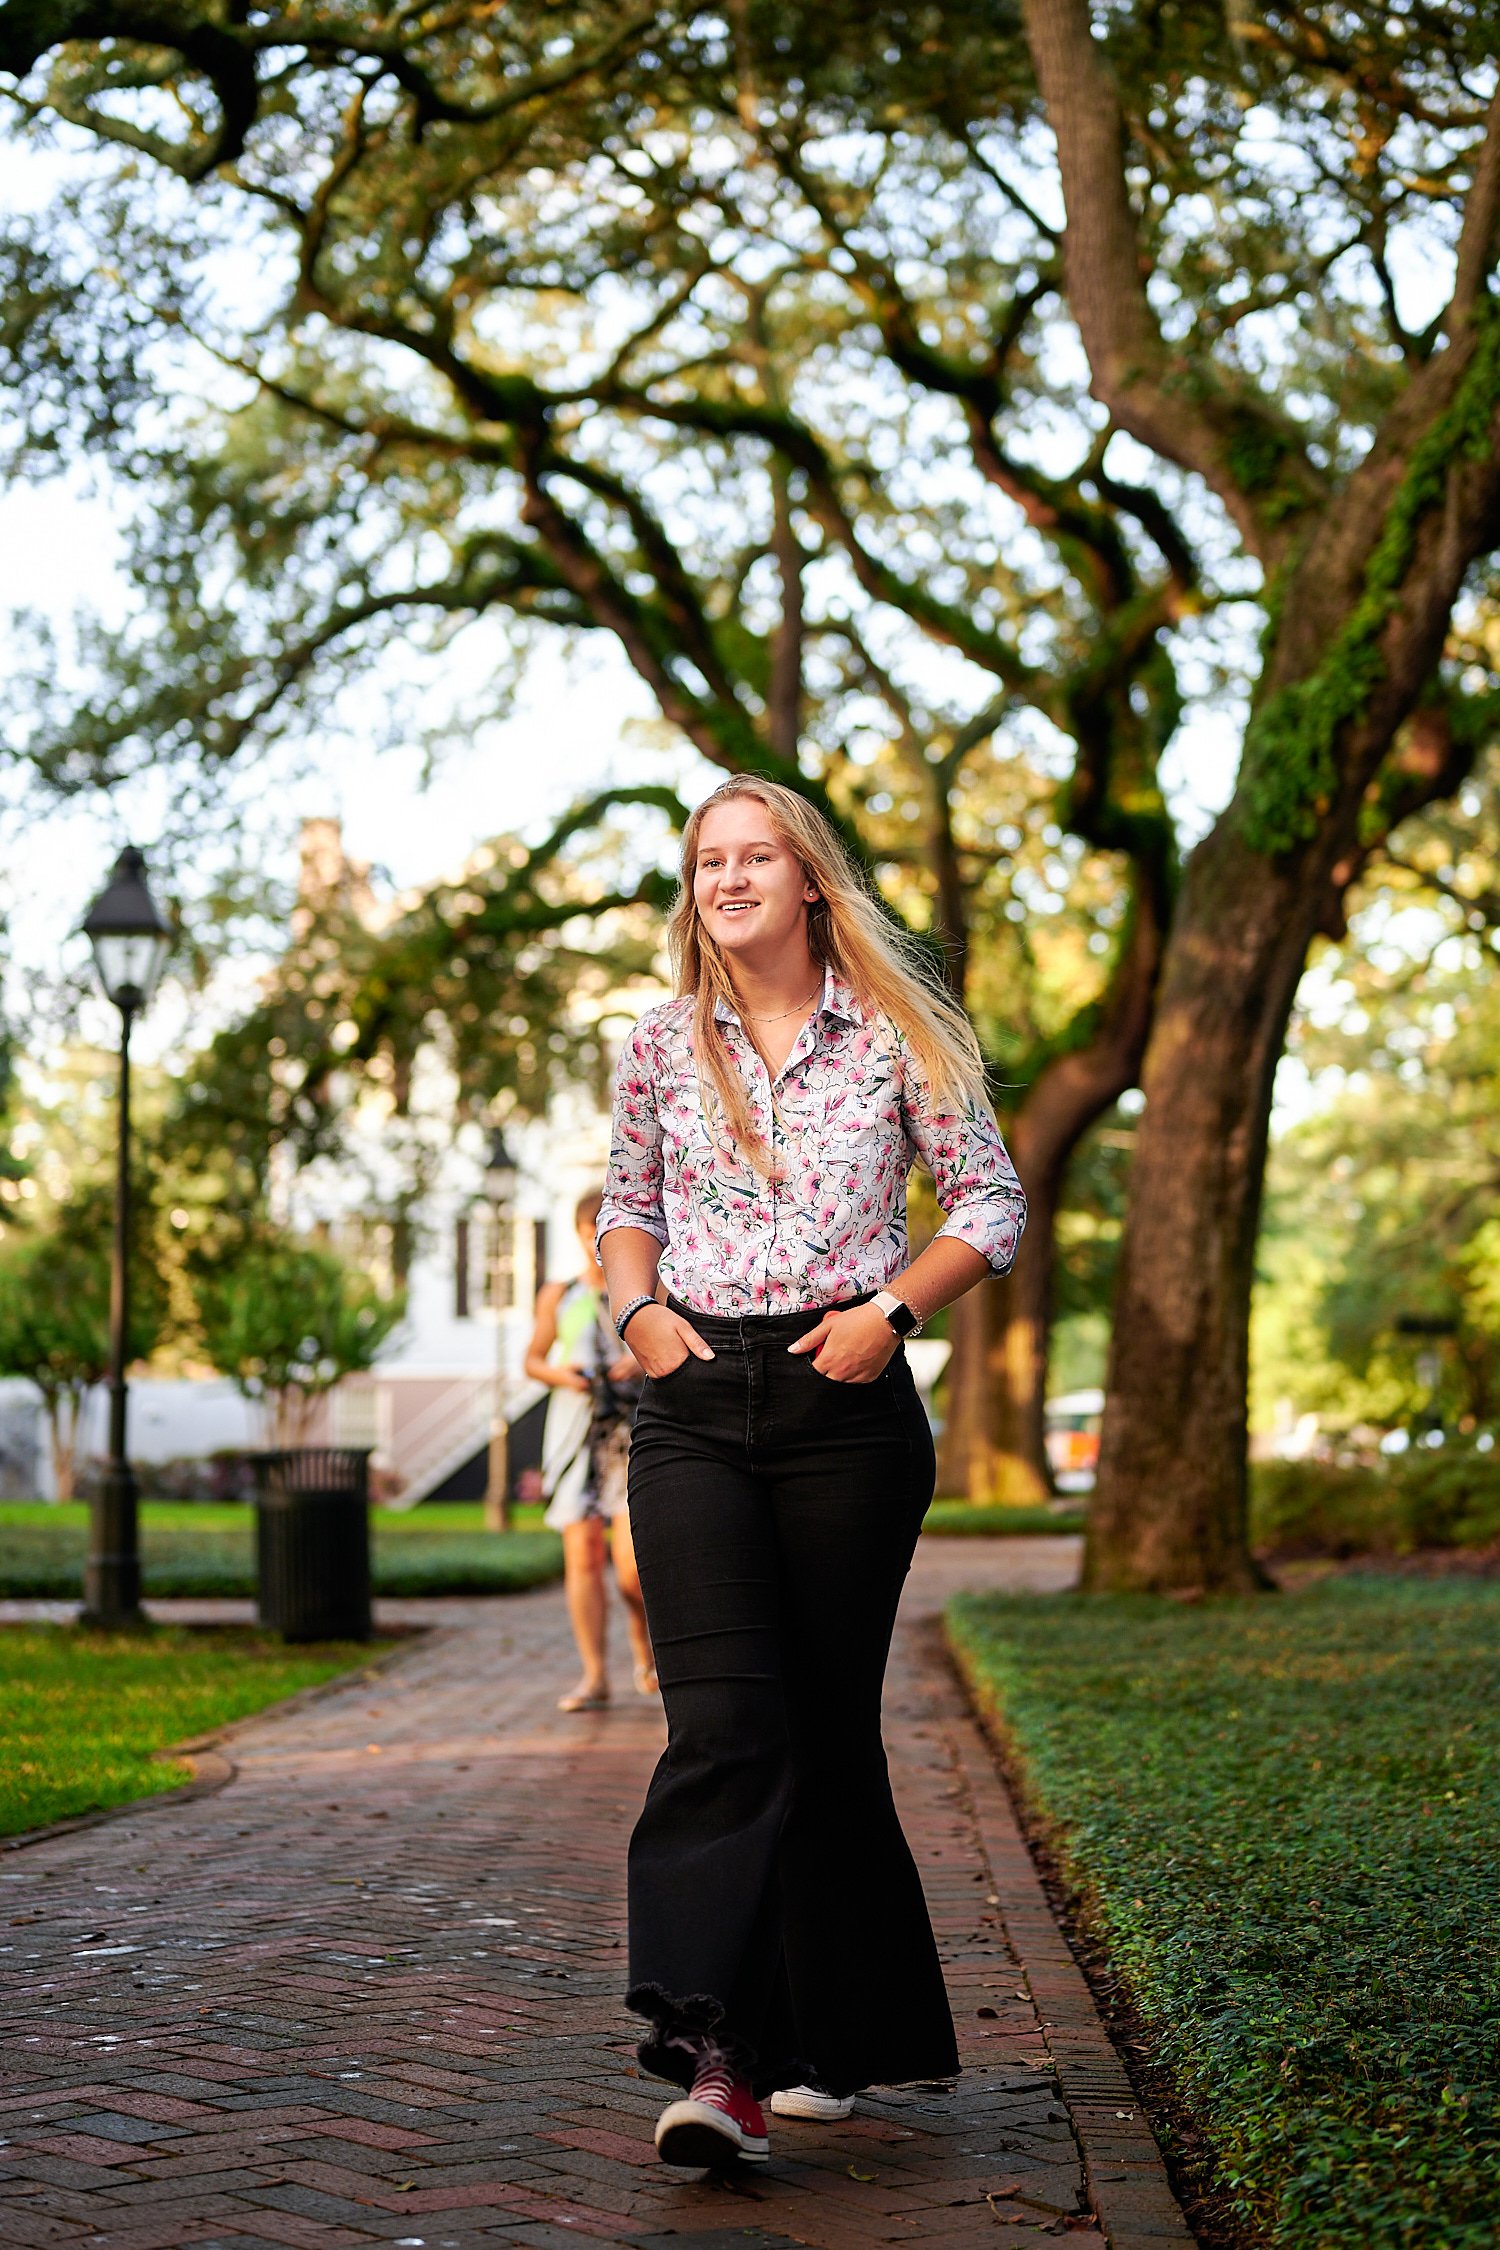  Savannah, Georgia, USA - OCTOBER 9TH 2021: a teenage girl is posing in the streets of Savannah on a warm autumn evening lit by the setting sun. The 16-year old had long blond hair and wore flare jeans 